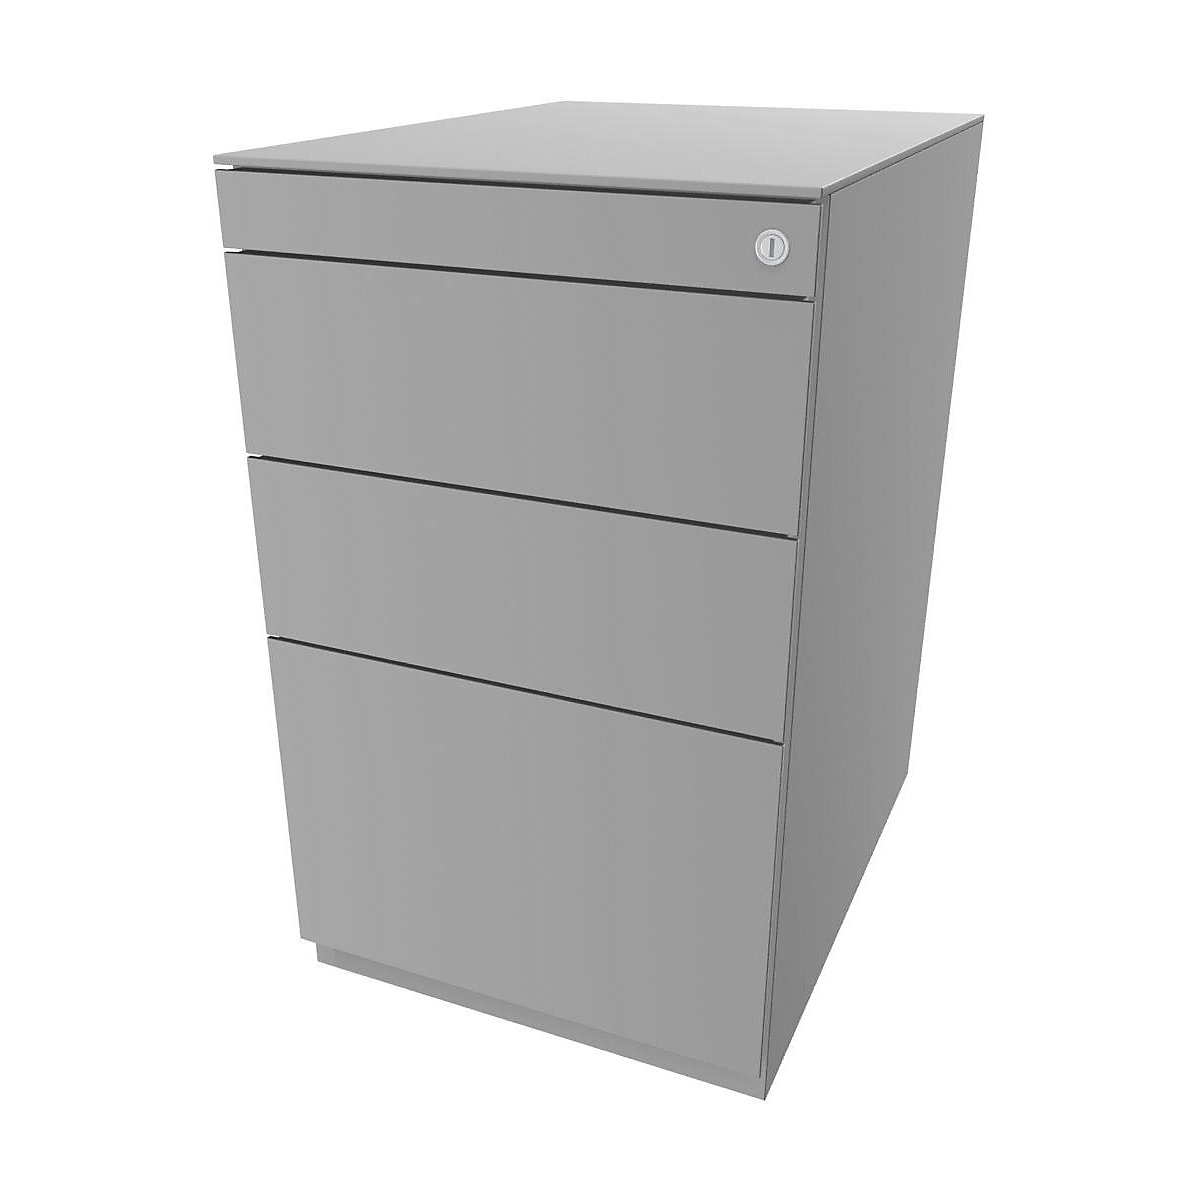 Note™ fixed pedestal, with 2 universal drawers, 1 suspension file drawer – BISLEY, with top, depth 565 mm, light grey-13